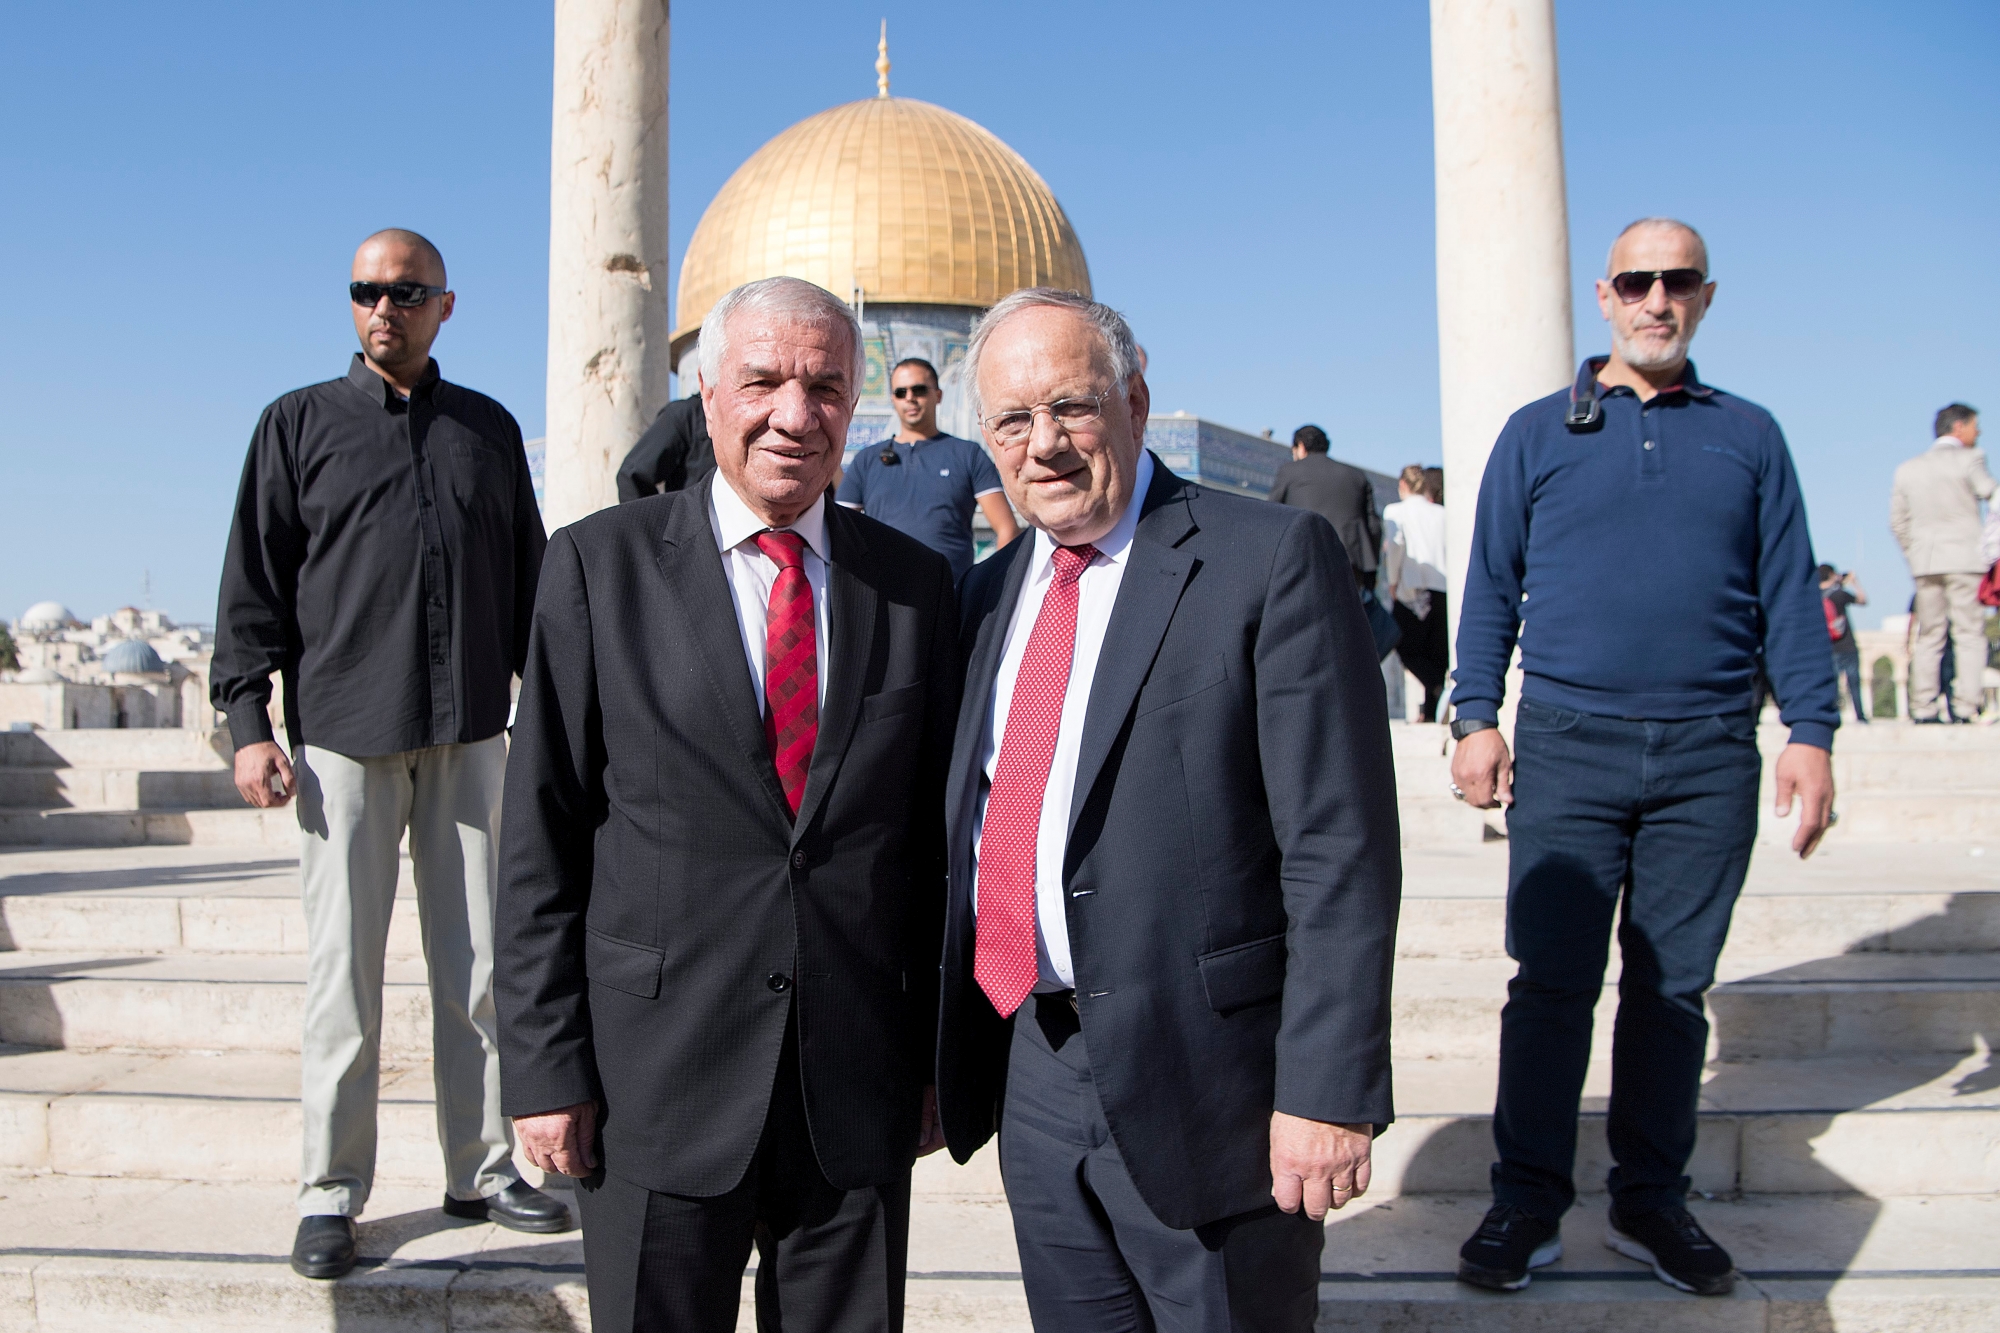 Sheikh Azzam al Khatib, head of the Jerusalem Islamic Waqf, left, and Swiss Federal Councillor Johann Schneider-Ammann, right, pose during a visit of the Al Aqsa compound and mosque at Jerusalem, Israel, during a working visit of Schneider-Ammann to Israel and the Palestinian territories, on Sunday, October 29, 2017. (KEYSTONE/Anthony Anex) ISRAEL VISIT SWITZERLAND